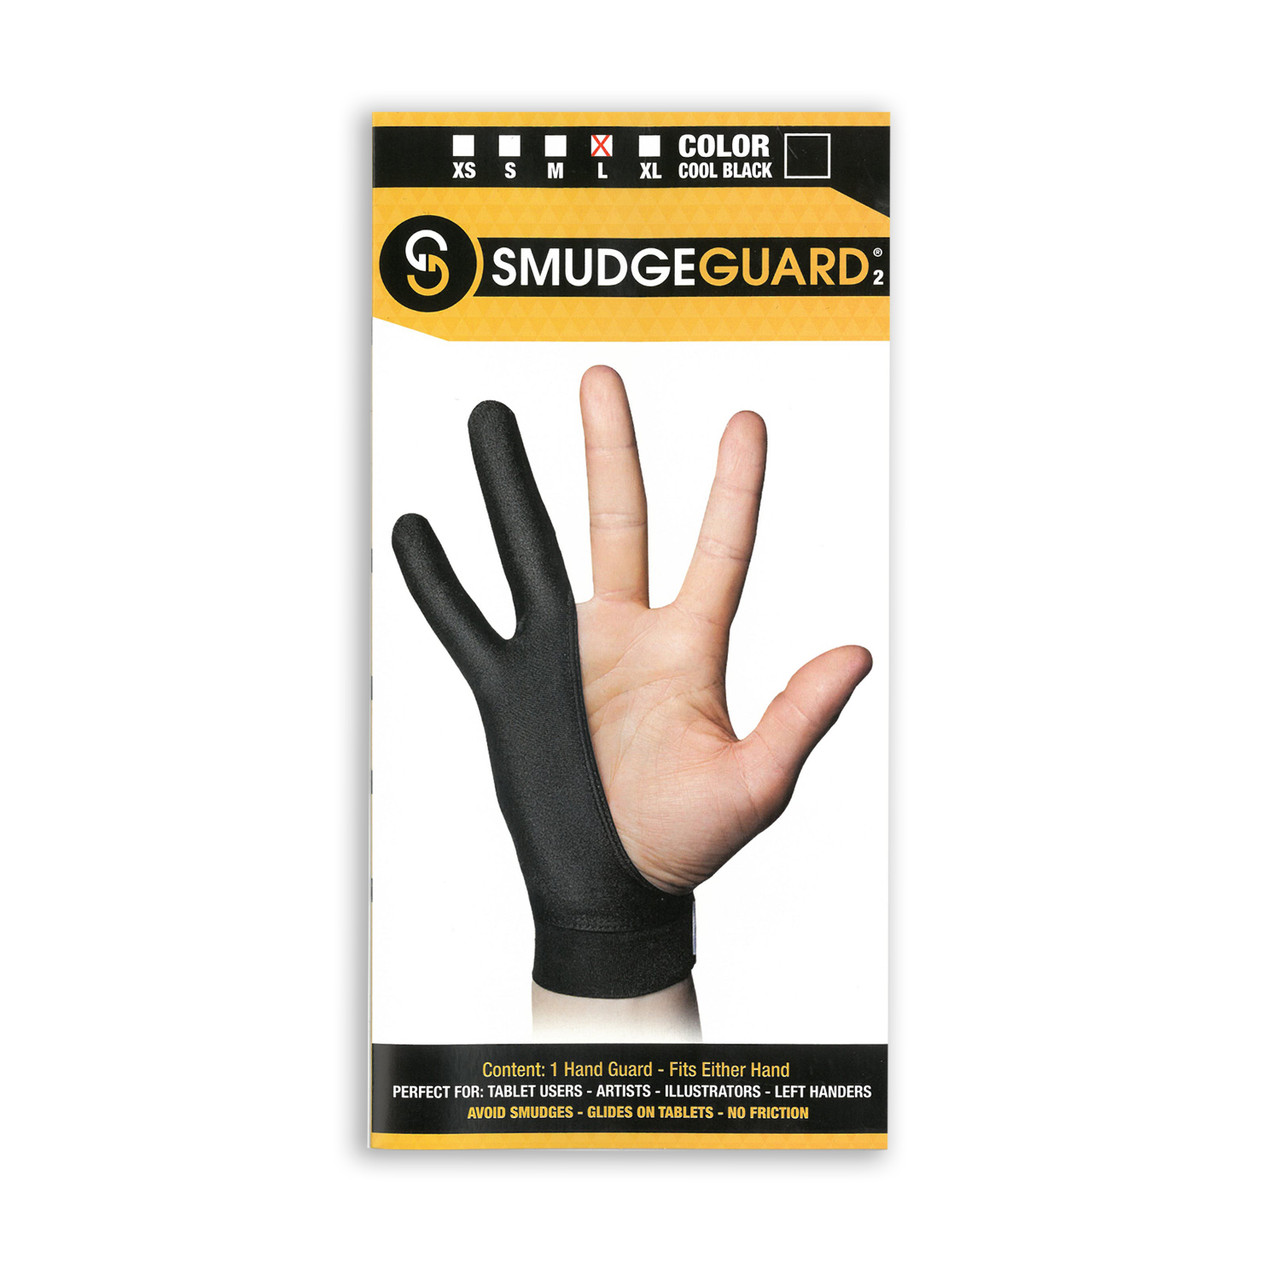 EMTRA Palm Rejection Gloves Two Finger Anti-fouling For